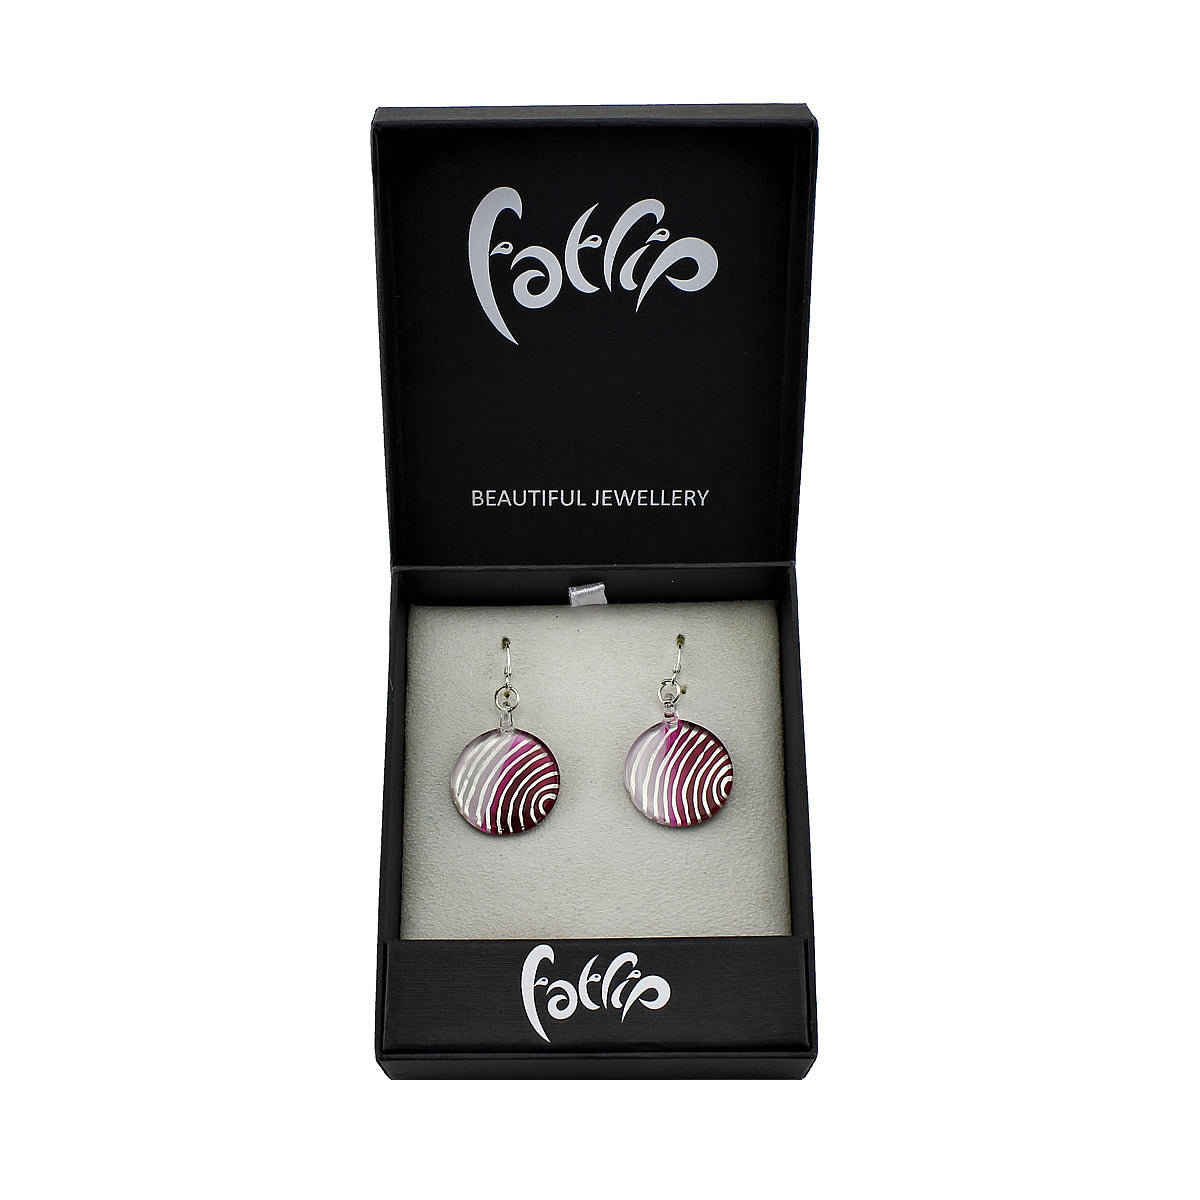 SWE550 - Pink Glass Round White Striped Drop Earring